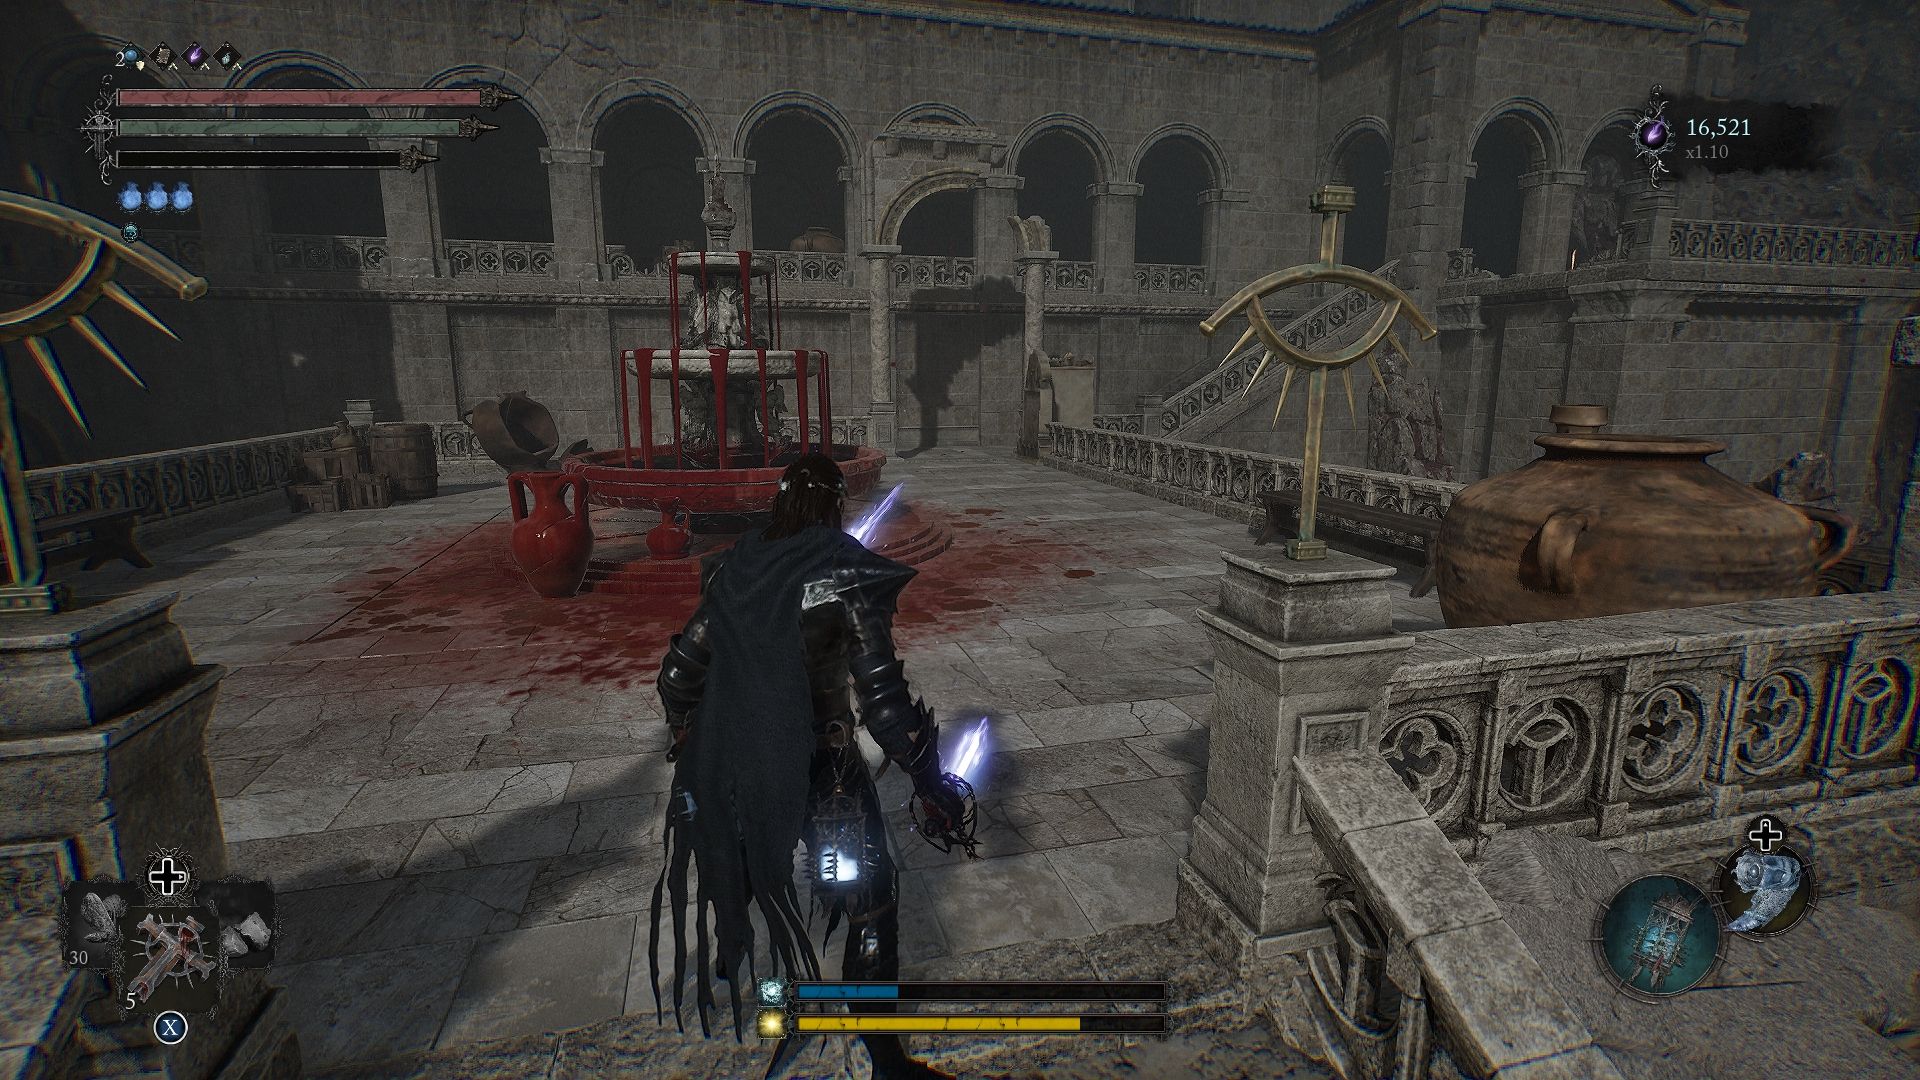 Player standing near a fountain and there are stairs to the right leading to a hallway Lords of the Fallen